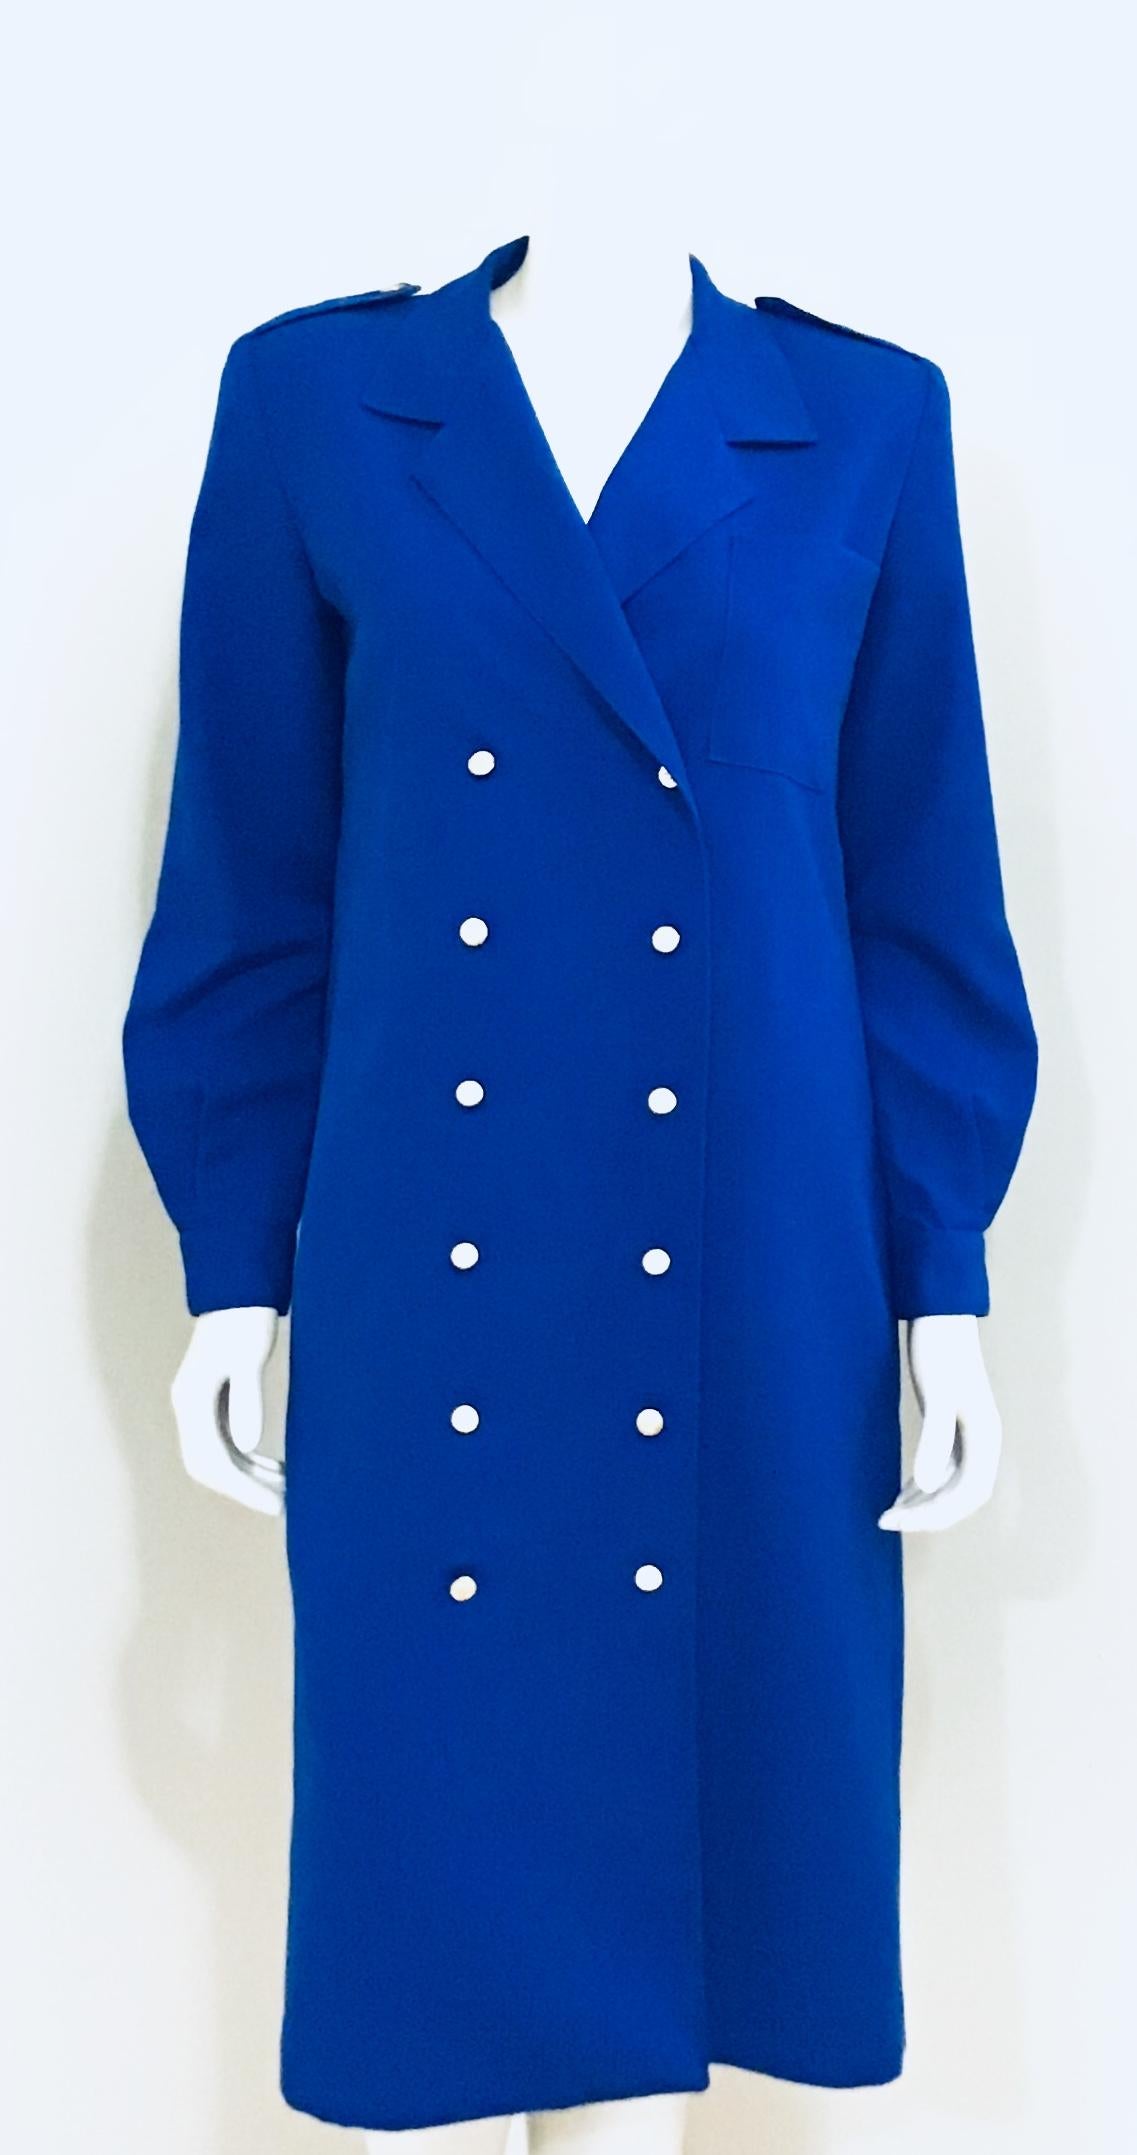 This Royal Blue dream fits like all things from Diane Von Furstenberg, comfortable. Wear with or without the belt, even wear open as a shirt jacket. It has gold buttons that gives the perfect added simple elegance. The classic double breasted style